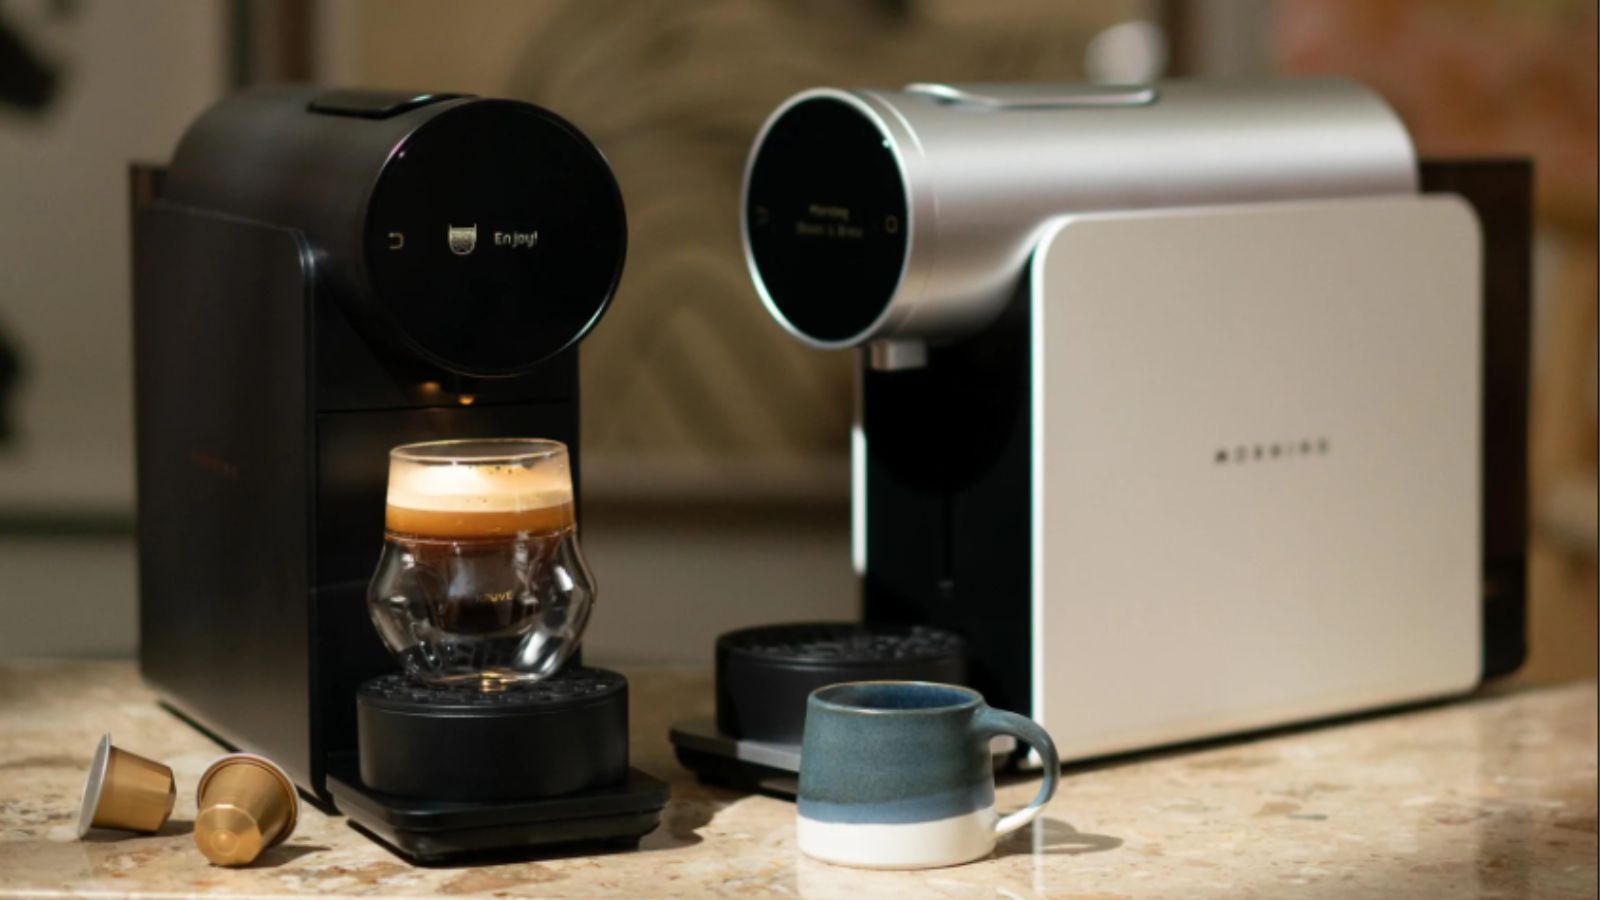 Morning Coffee Maker review: Wake up right with this hi-tech coffee maker